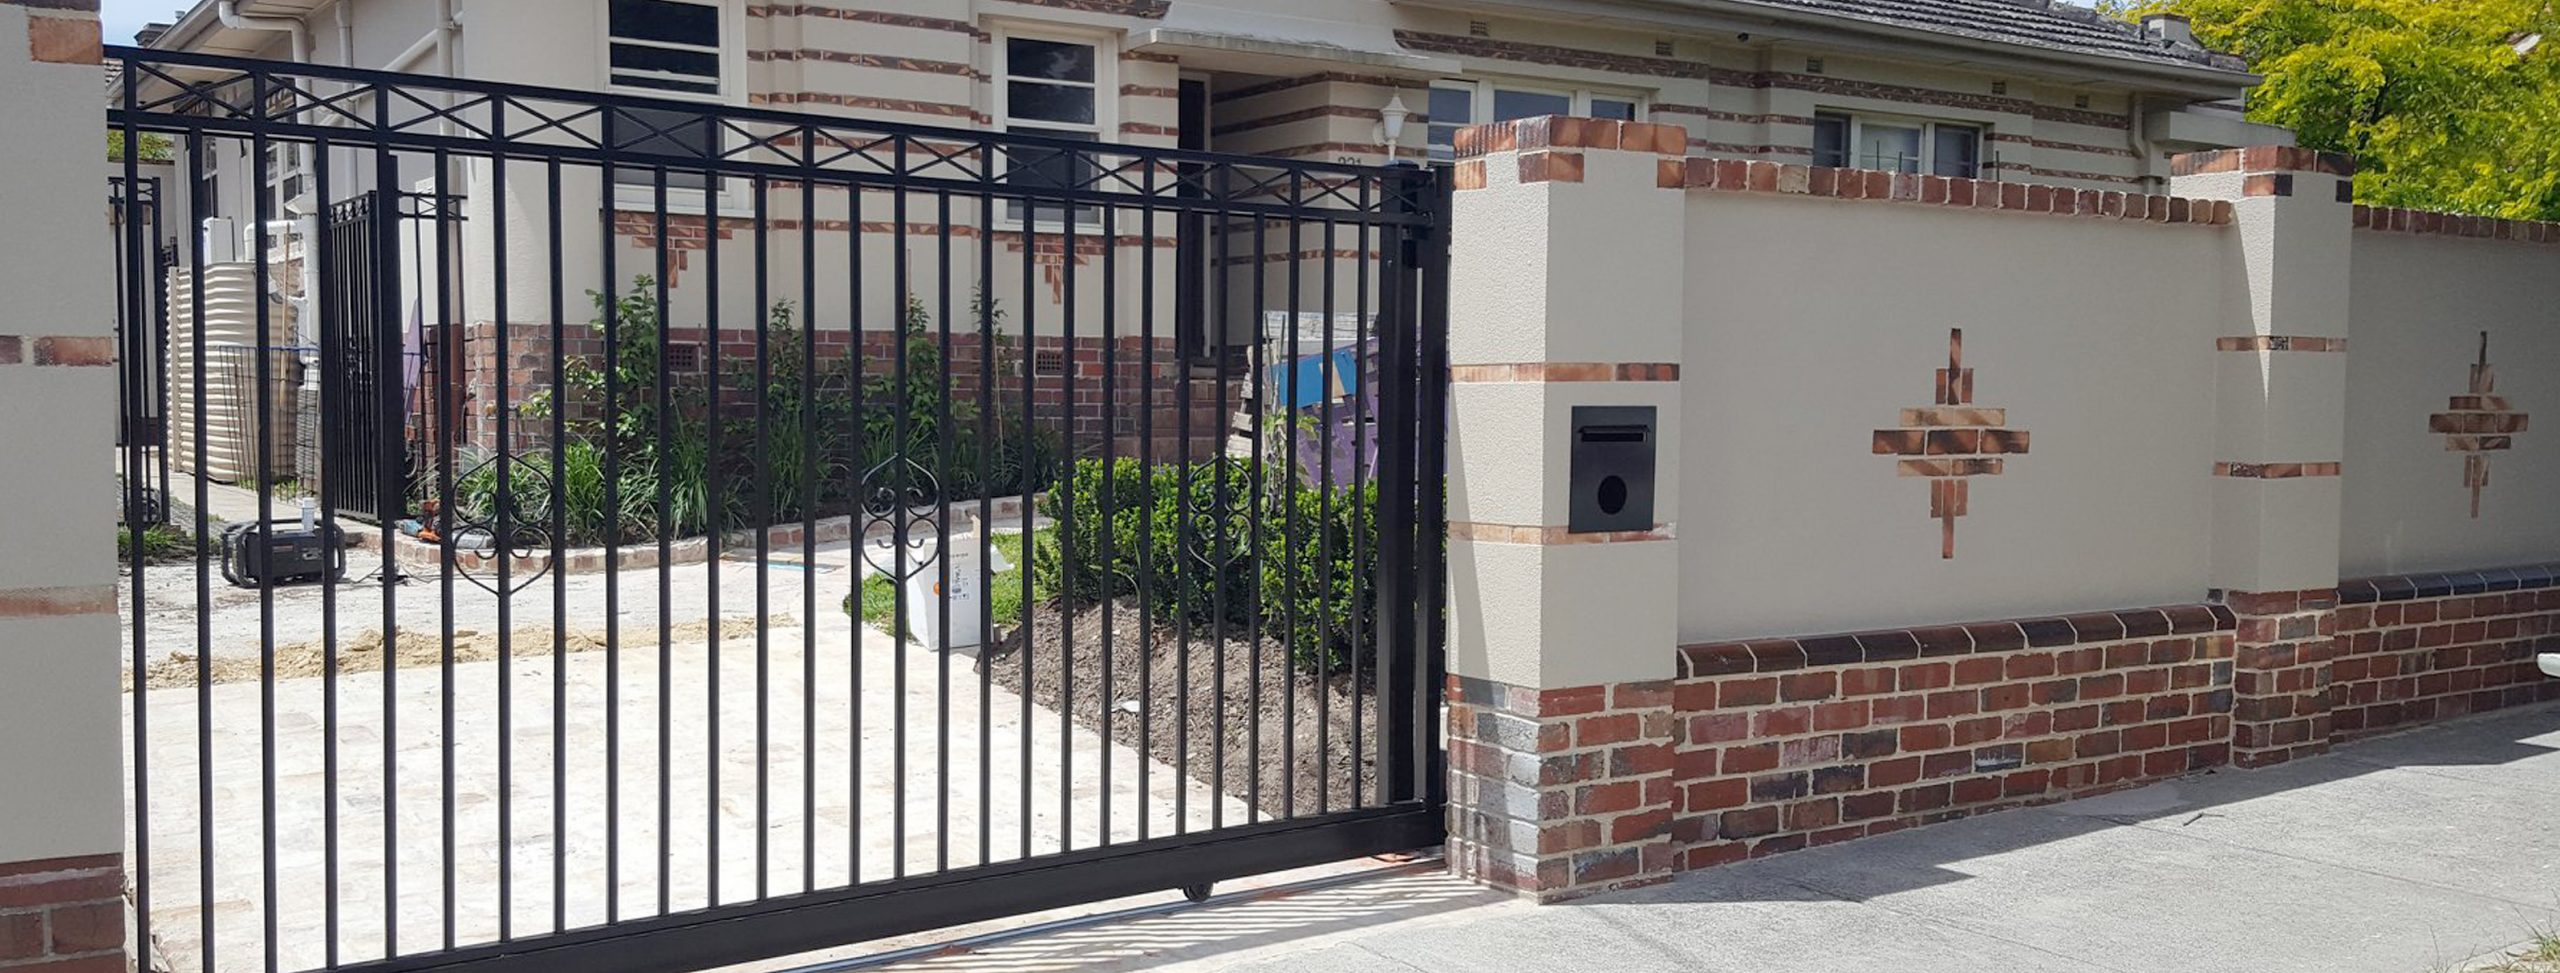 Combination Brick fence with steel sliding gate designed and built by Custom Built Fences